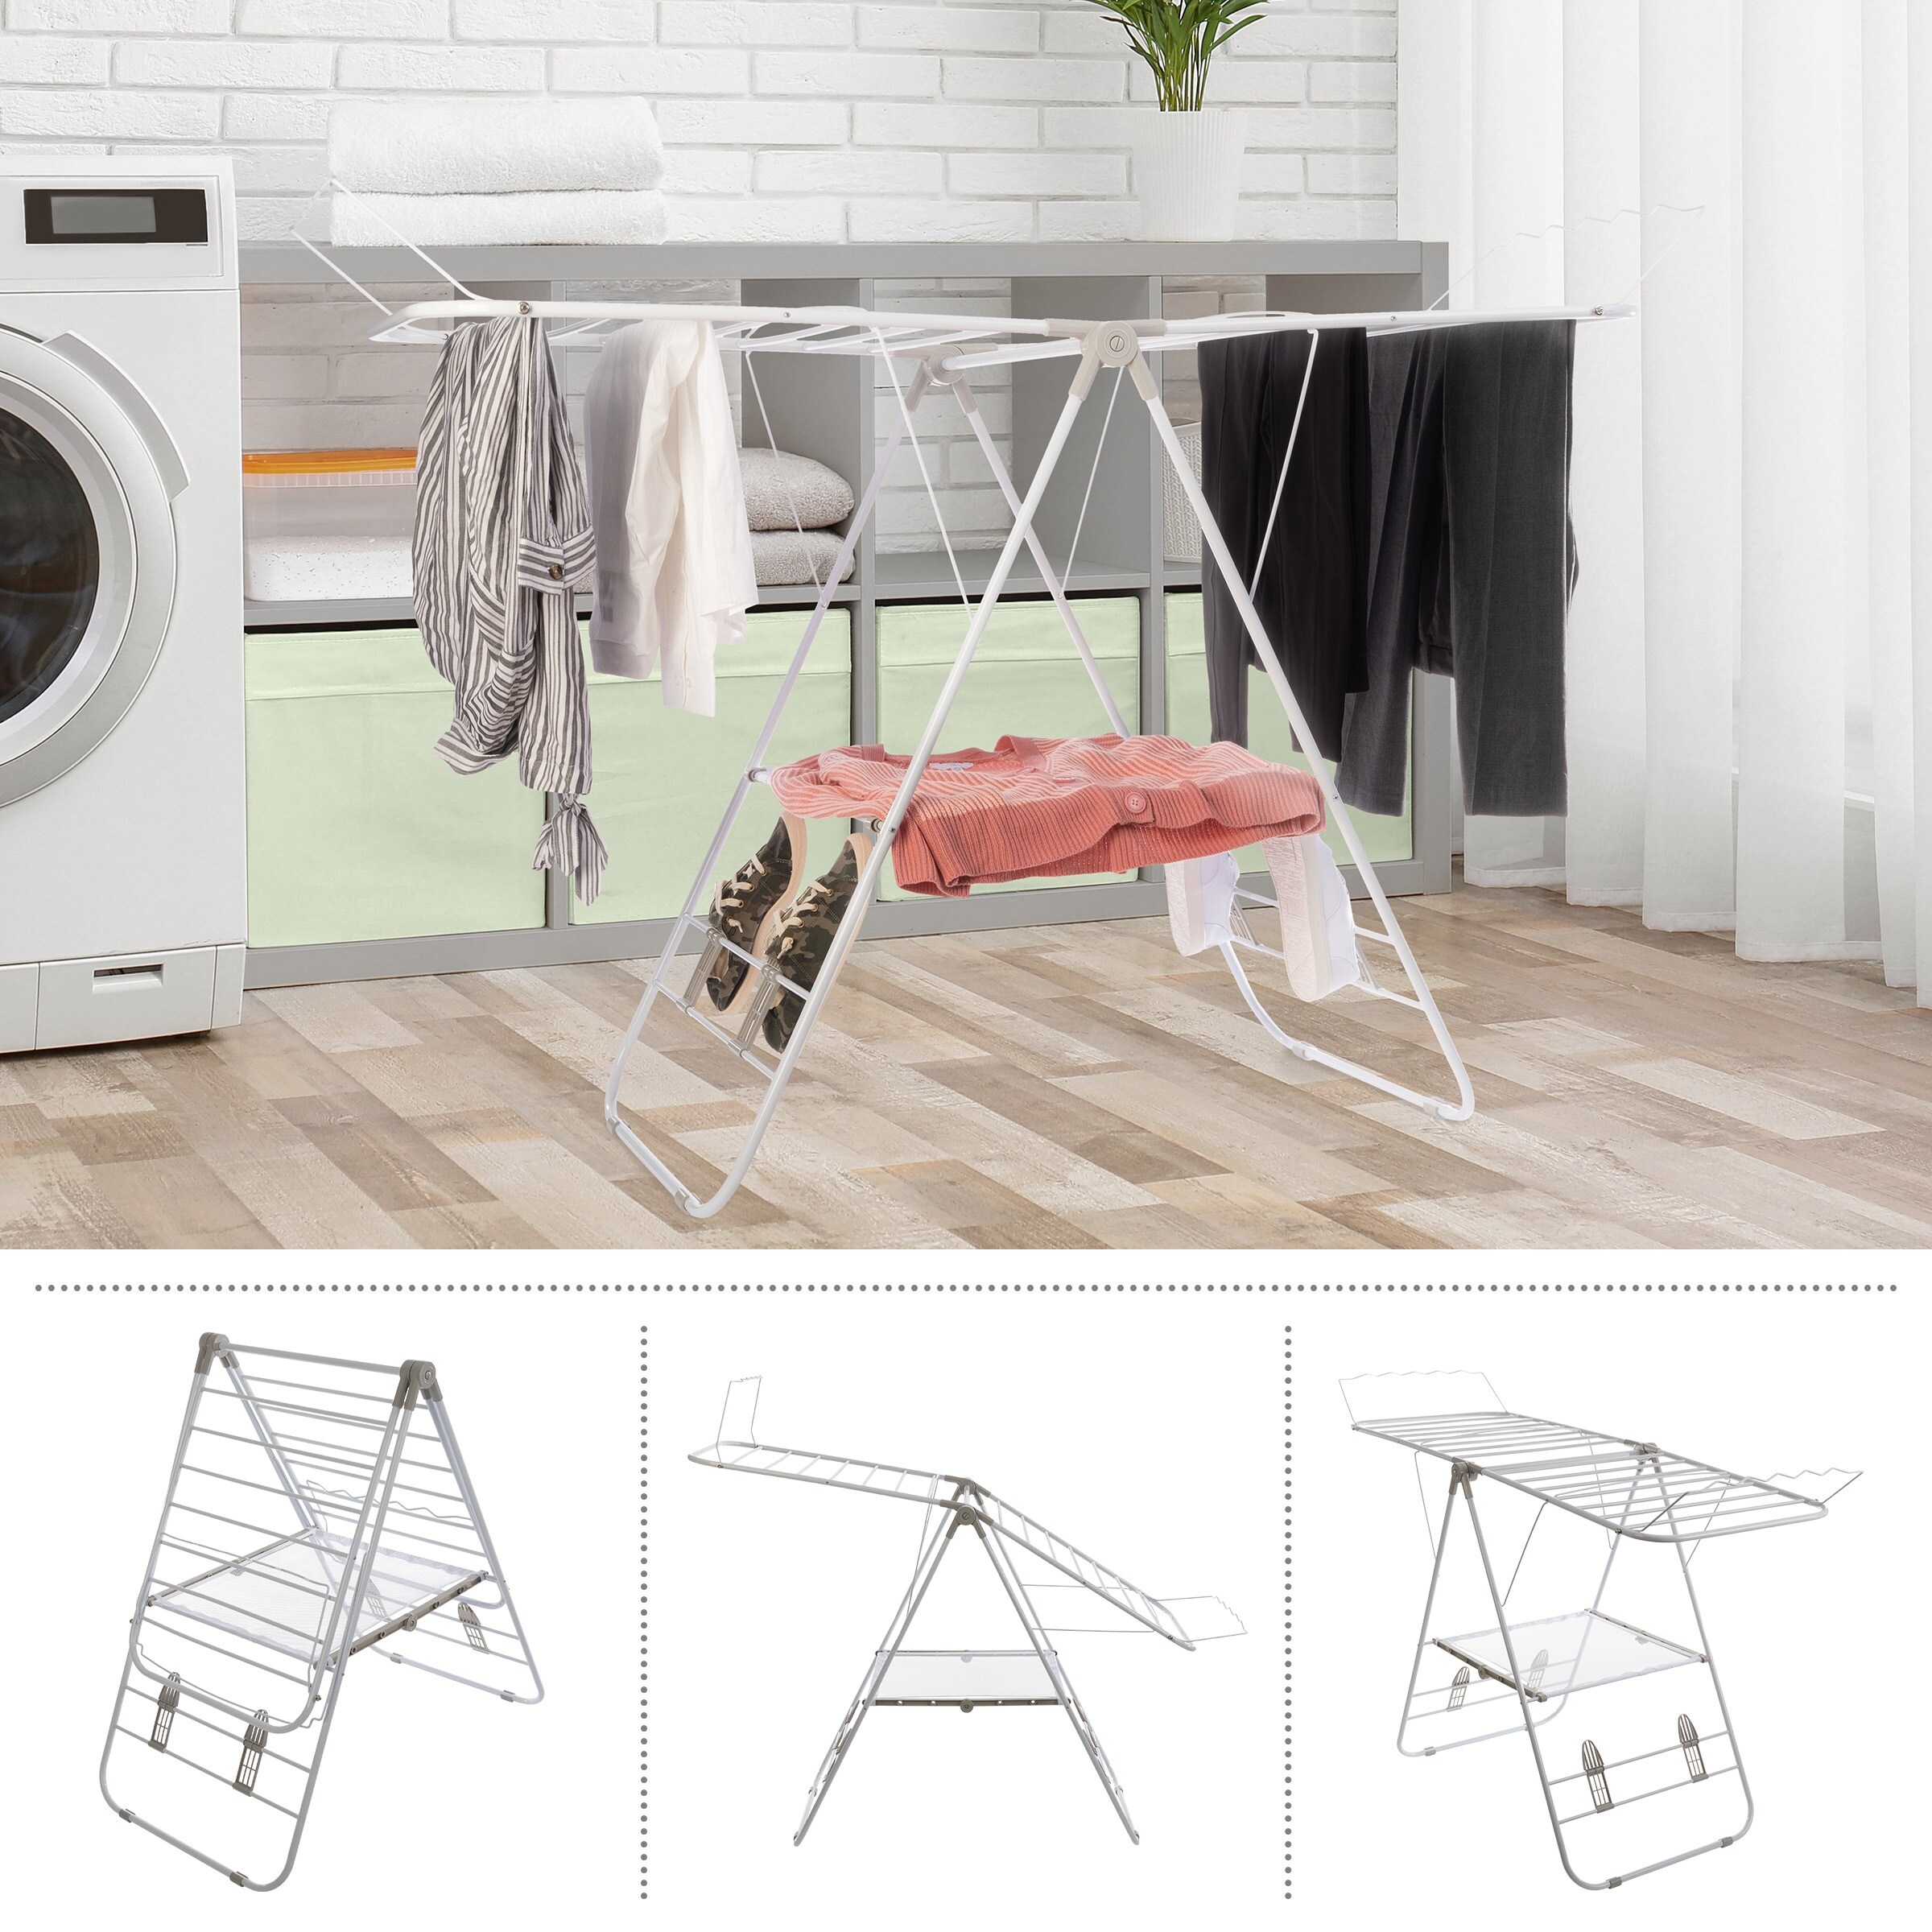 Foldable Clothes Drying Laundry Rack - White